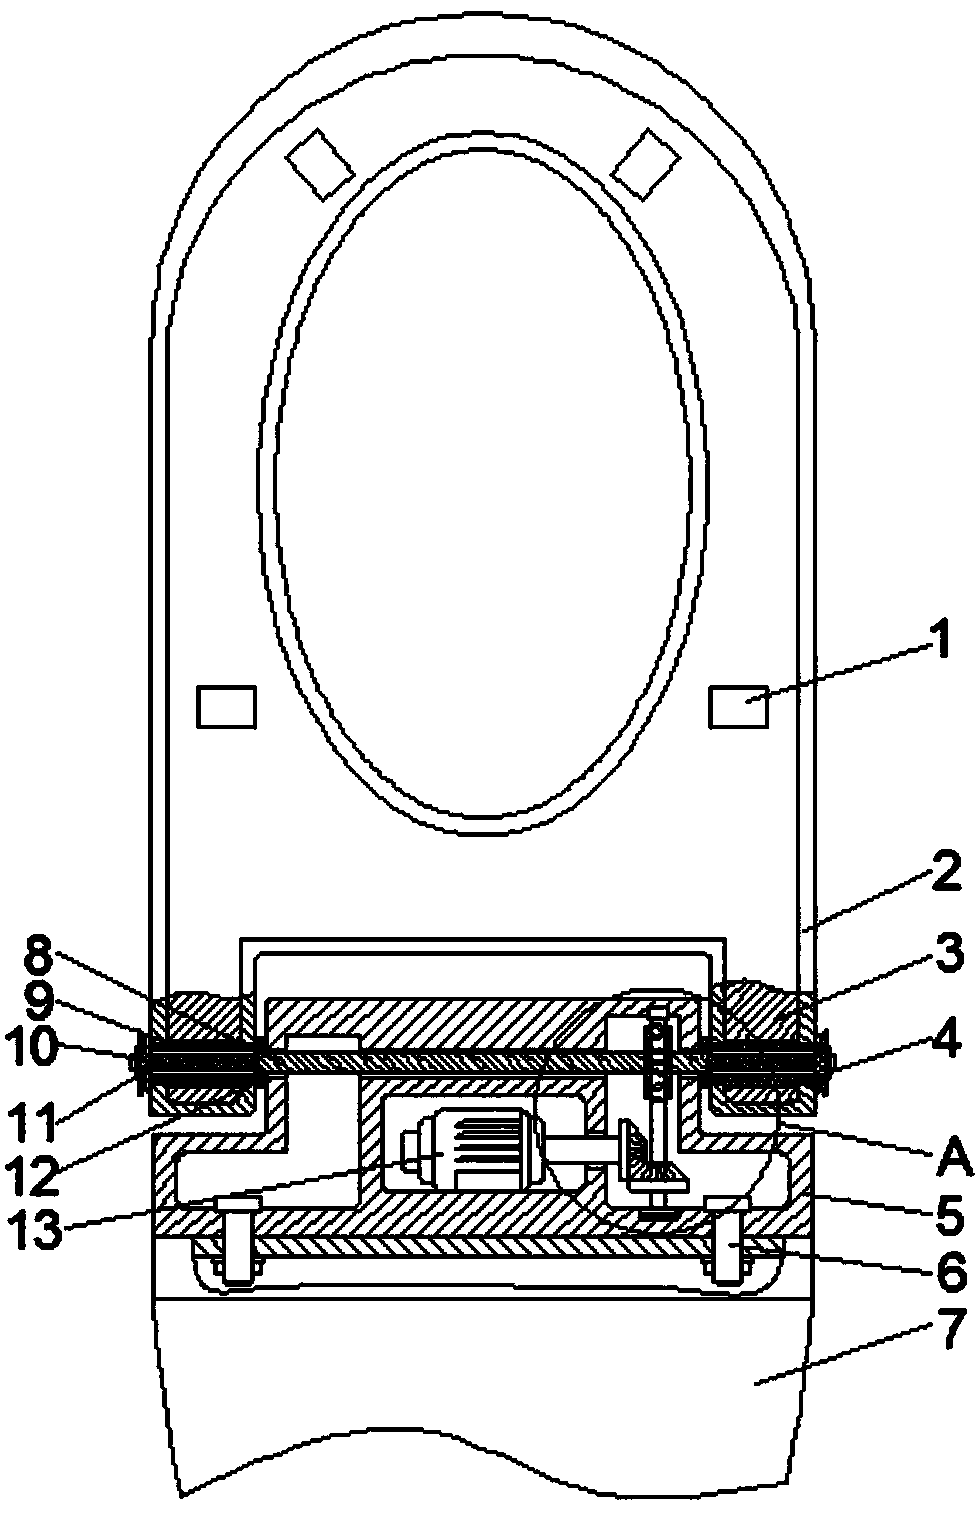 Toilet with toilet ring capable of being automatically opened and closed